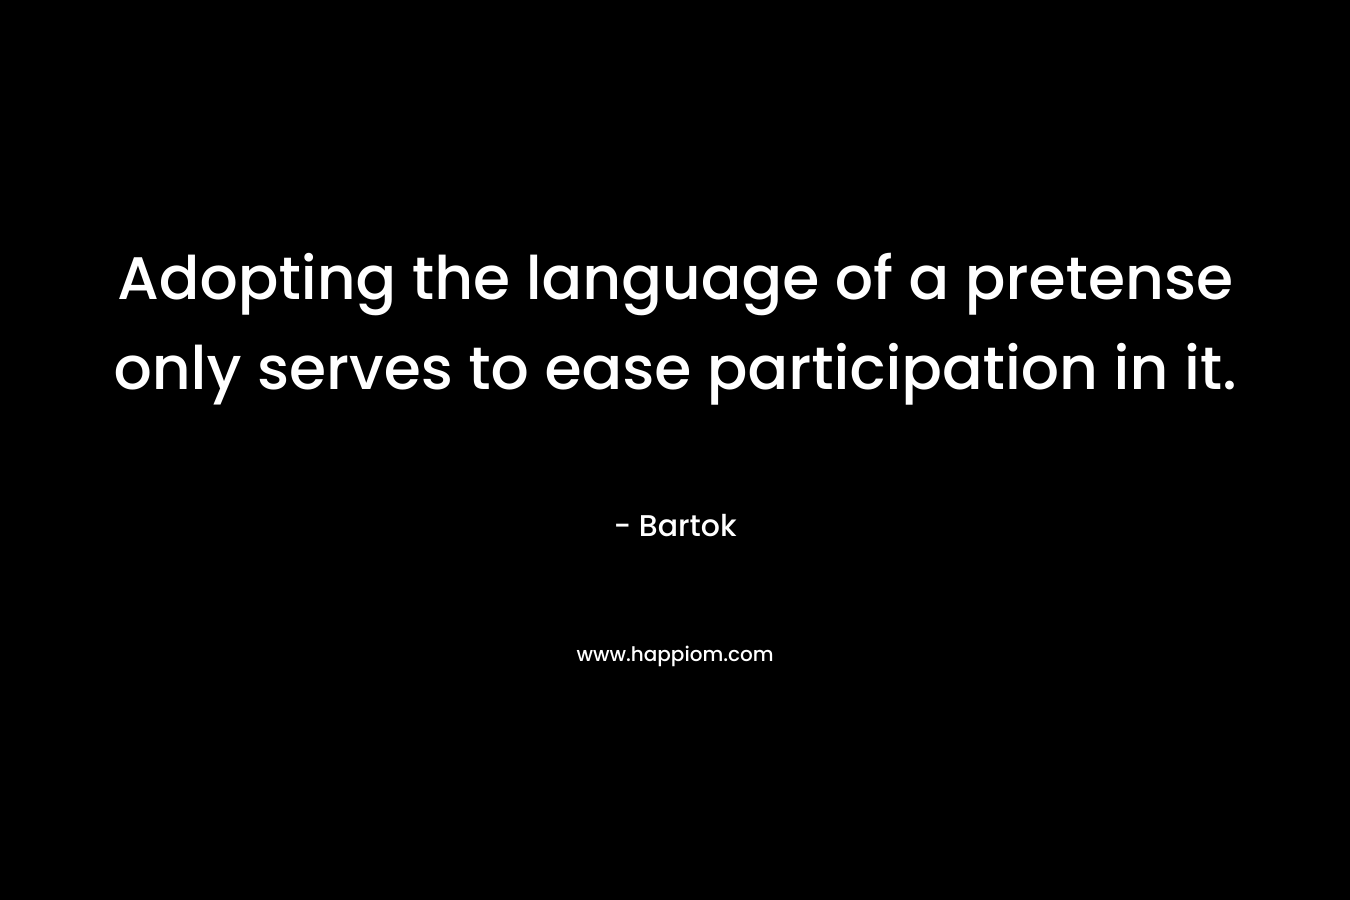 Adopting the language of a pretense only serves to ease participation in it.